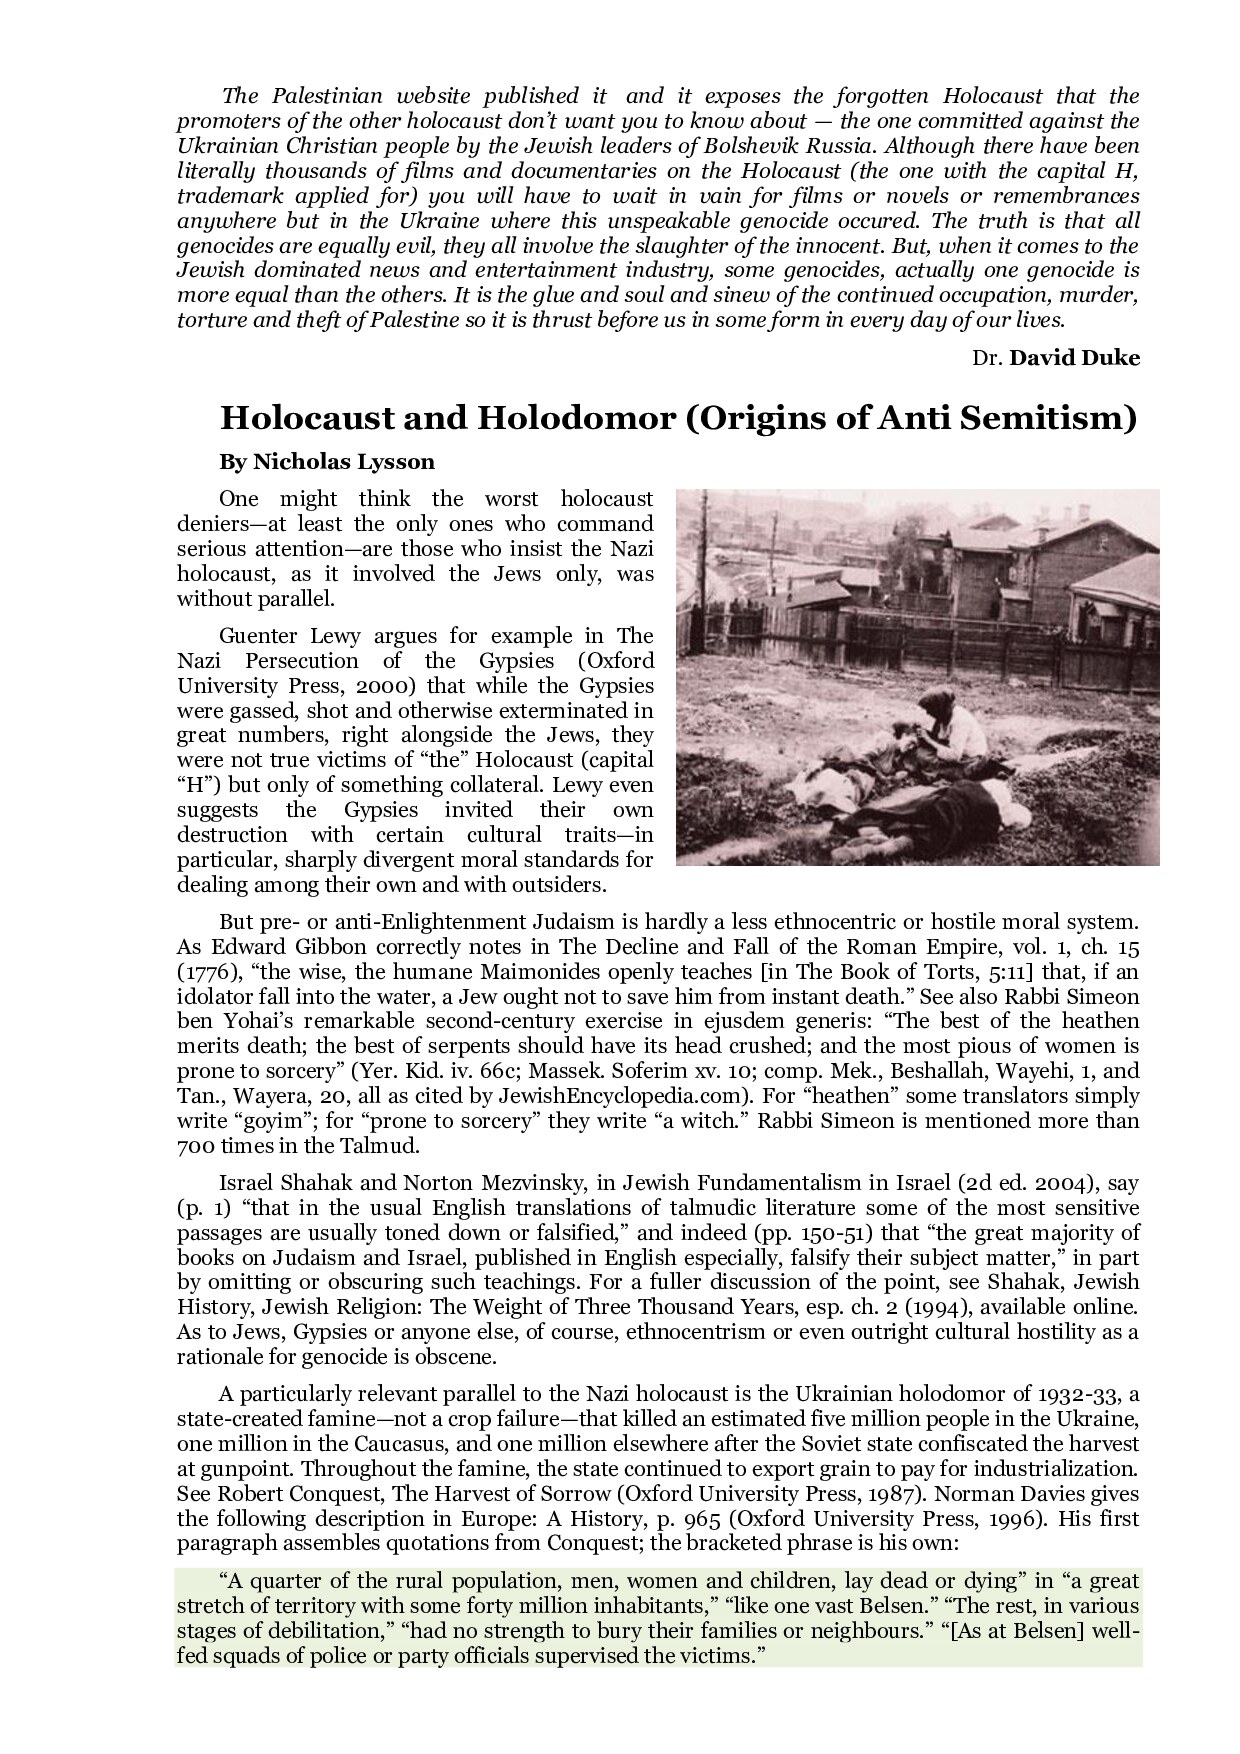 Lysson, Nicholas; The Holodomor And The Holocaust (The Origins Of Modern Antisemitism)